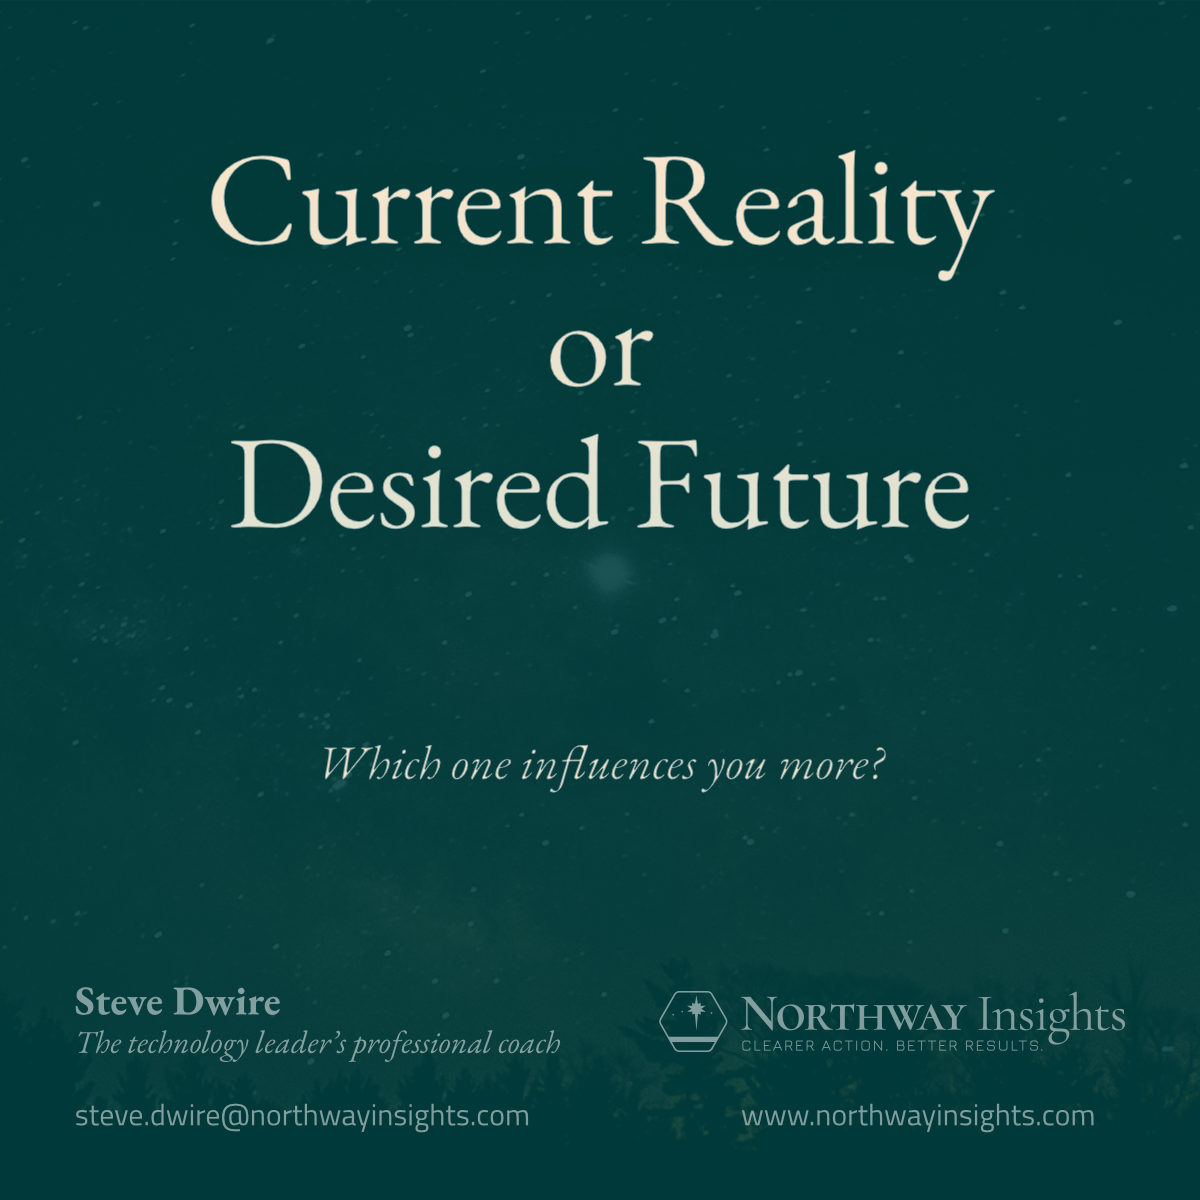 Current Reality or Desired Future